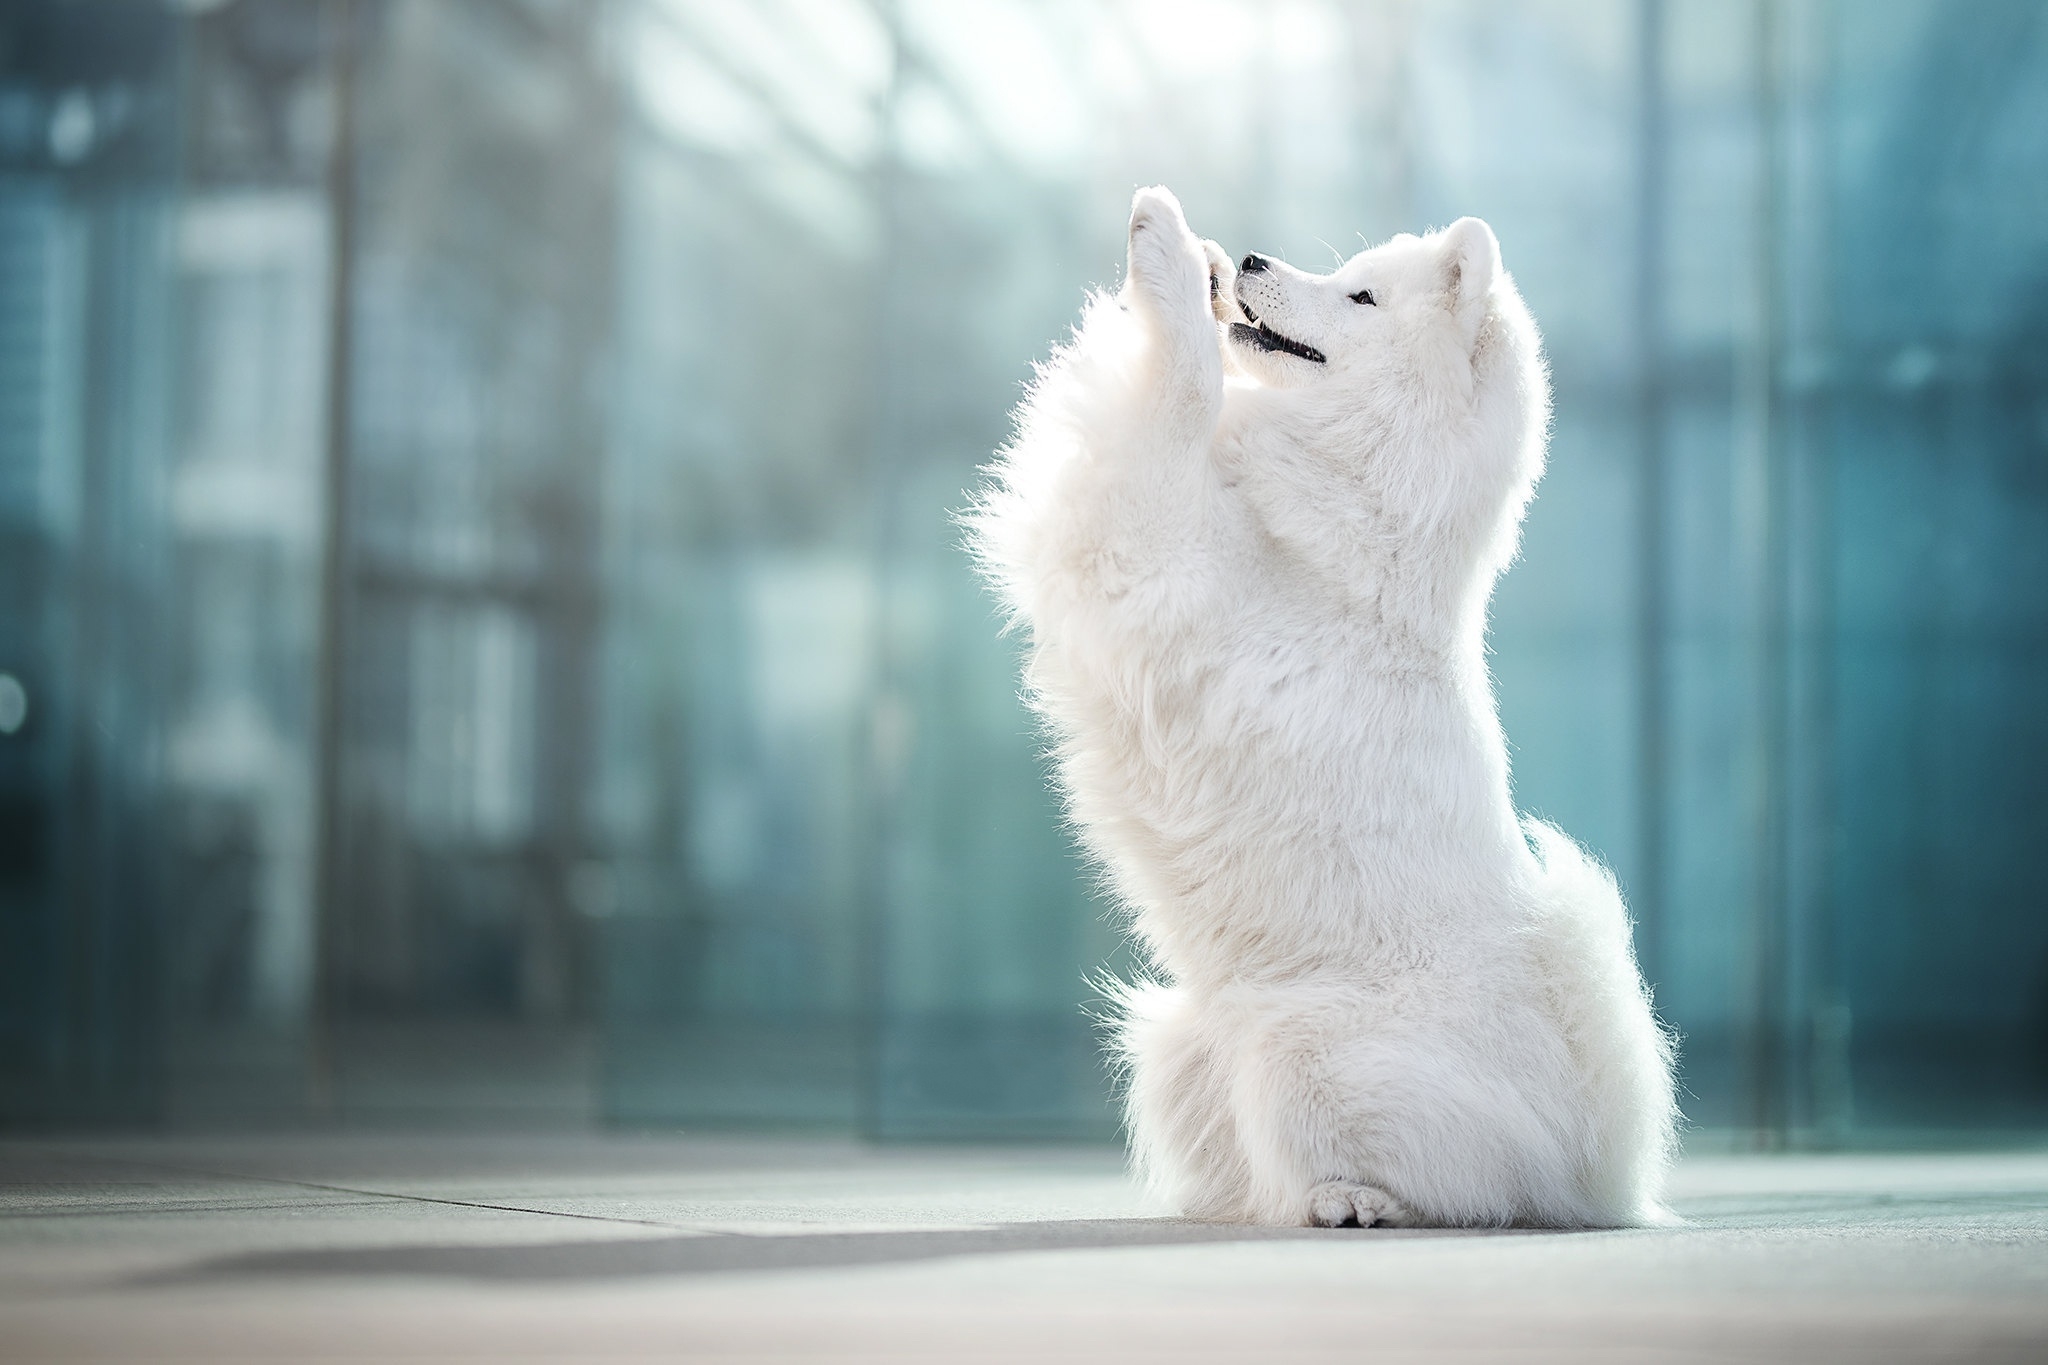 Free photo A white fluffy dog stands on its hind legs